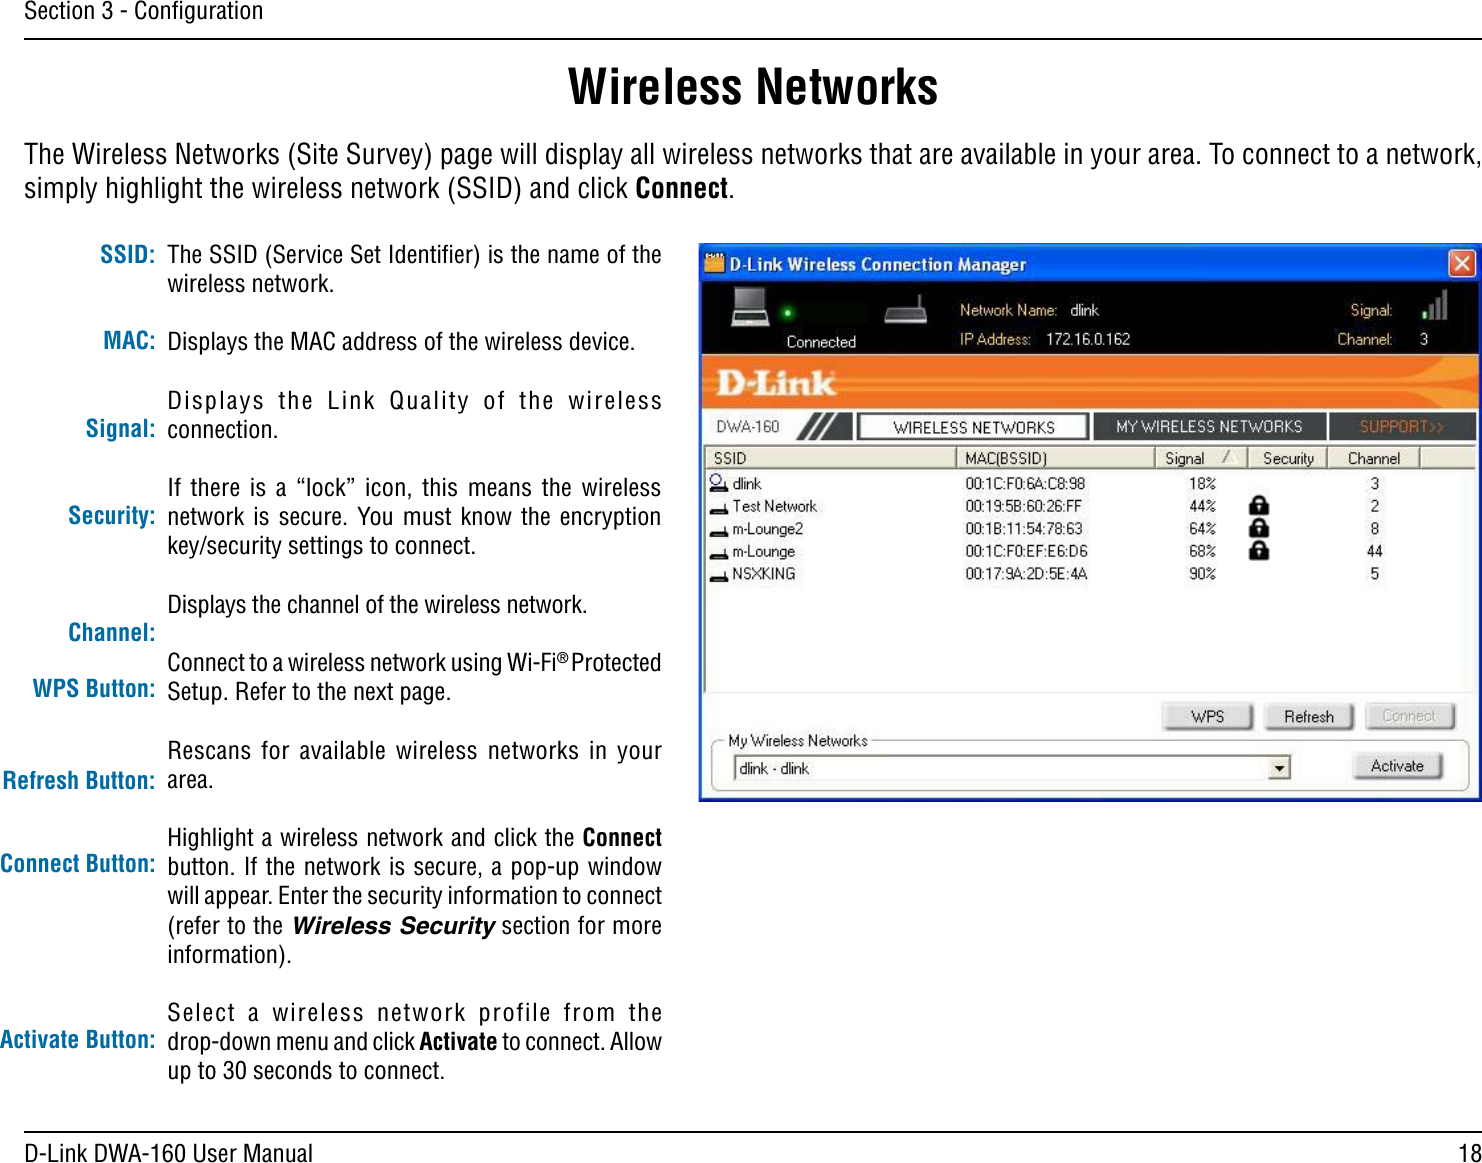 18D-Link DWA-160 User ManualSection 3 - ConﬁgurationWireless NetworksThe SSID (Service Set Identiﬁer) is the name of the wireless network.Displays the MAC address of the wireless device.$ISPLAYS THE ,INK 1UALITY OF THE WIRELESSconnection. If there is a “lock” icon, this means the wireless NETWORK IS SECURE 9OU MUST KNOW THE ENCRYPTIONkey/security settings to connect.Displays the channel of the wireless network.Connect to a wireless network using Wi-Fi® Protected Setup. Refer to the next page.Rescans for available wireless networks in your area.Highlight a wireless network and click the Connect button. If the network is secure, a pop-up window will appear. Enter the security information to connect (refer to the Wireless Security section for more information).Select a wireless network profile from the  drop-down menu and click Activate to connect. Allow up to 30 seconds to connect.MAC:SSID:Channel:Signal:Security:Refresh Button:Connect Button:Activate Button:The Wireless Networks (Site Survey) page will display all wireless networks that are available in your area. To connect to a network, simply highlight the wireless network (SSID) and click Connect.WPS Button: